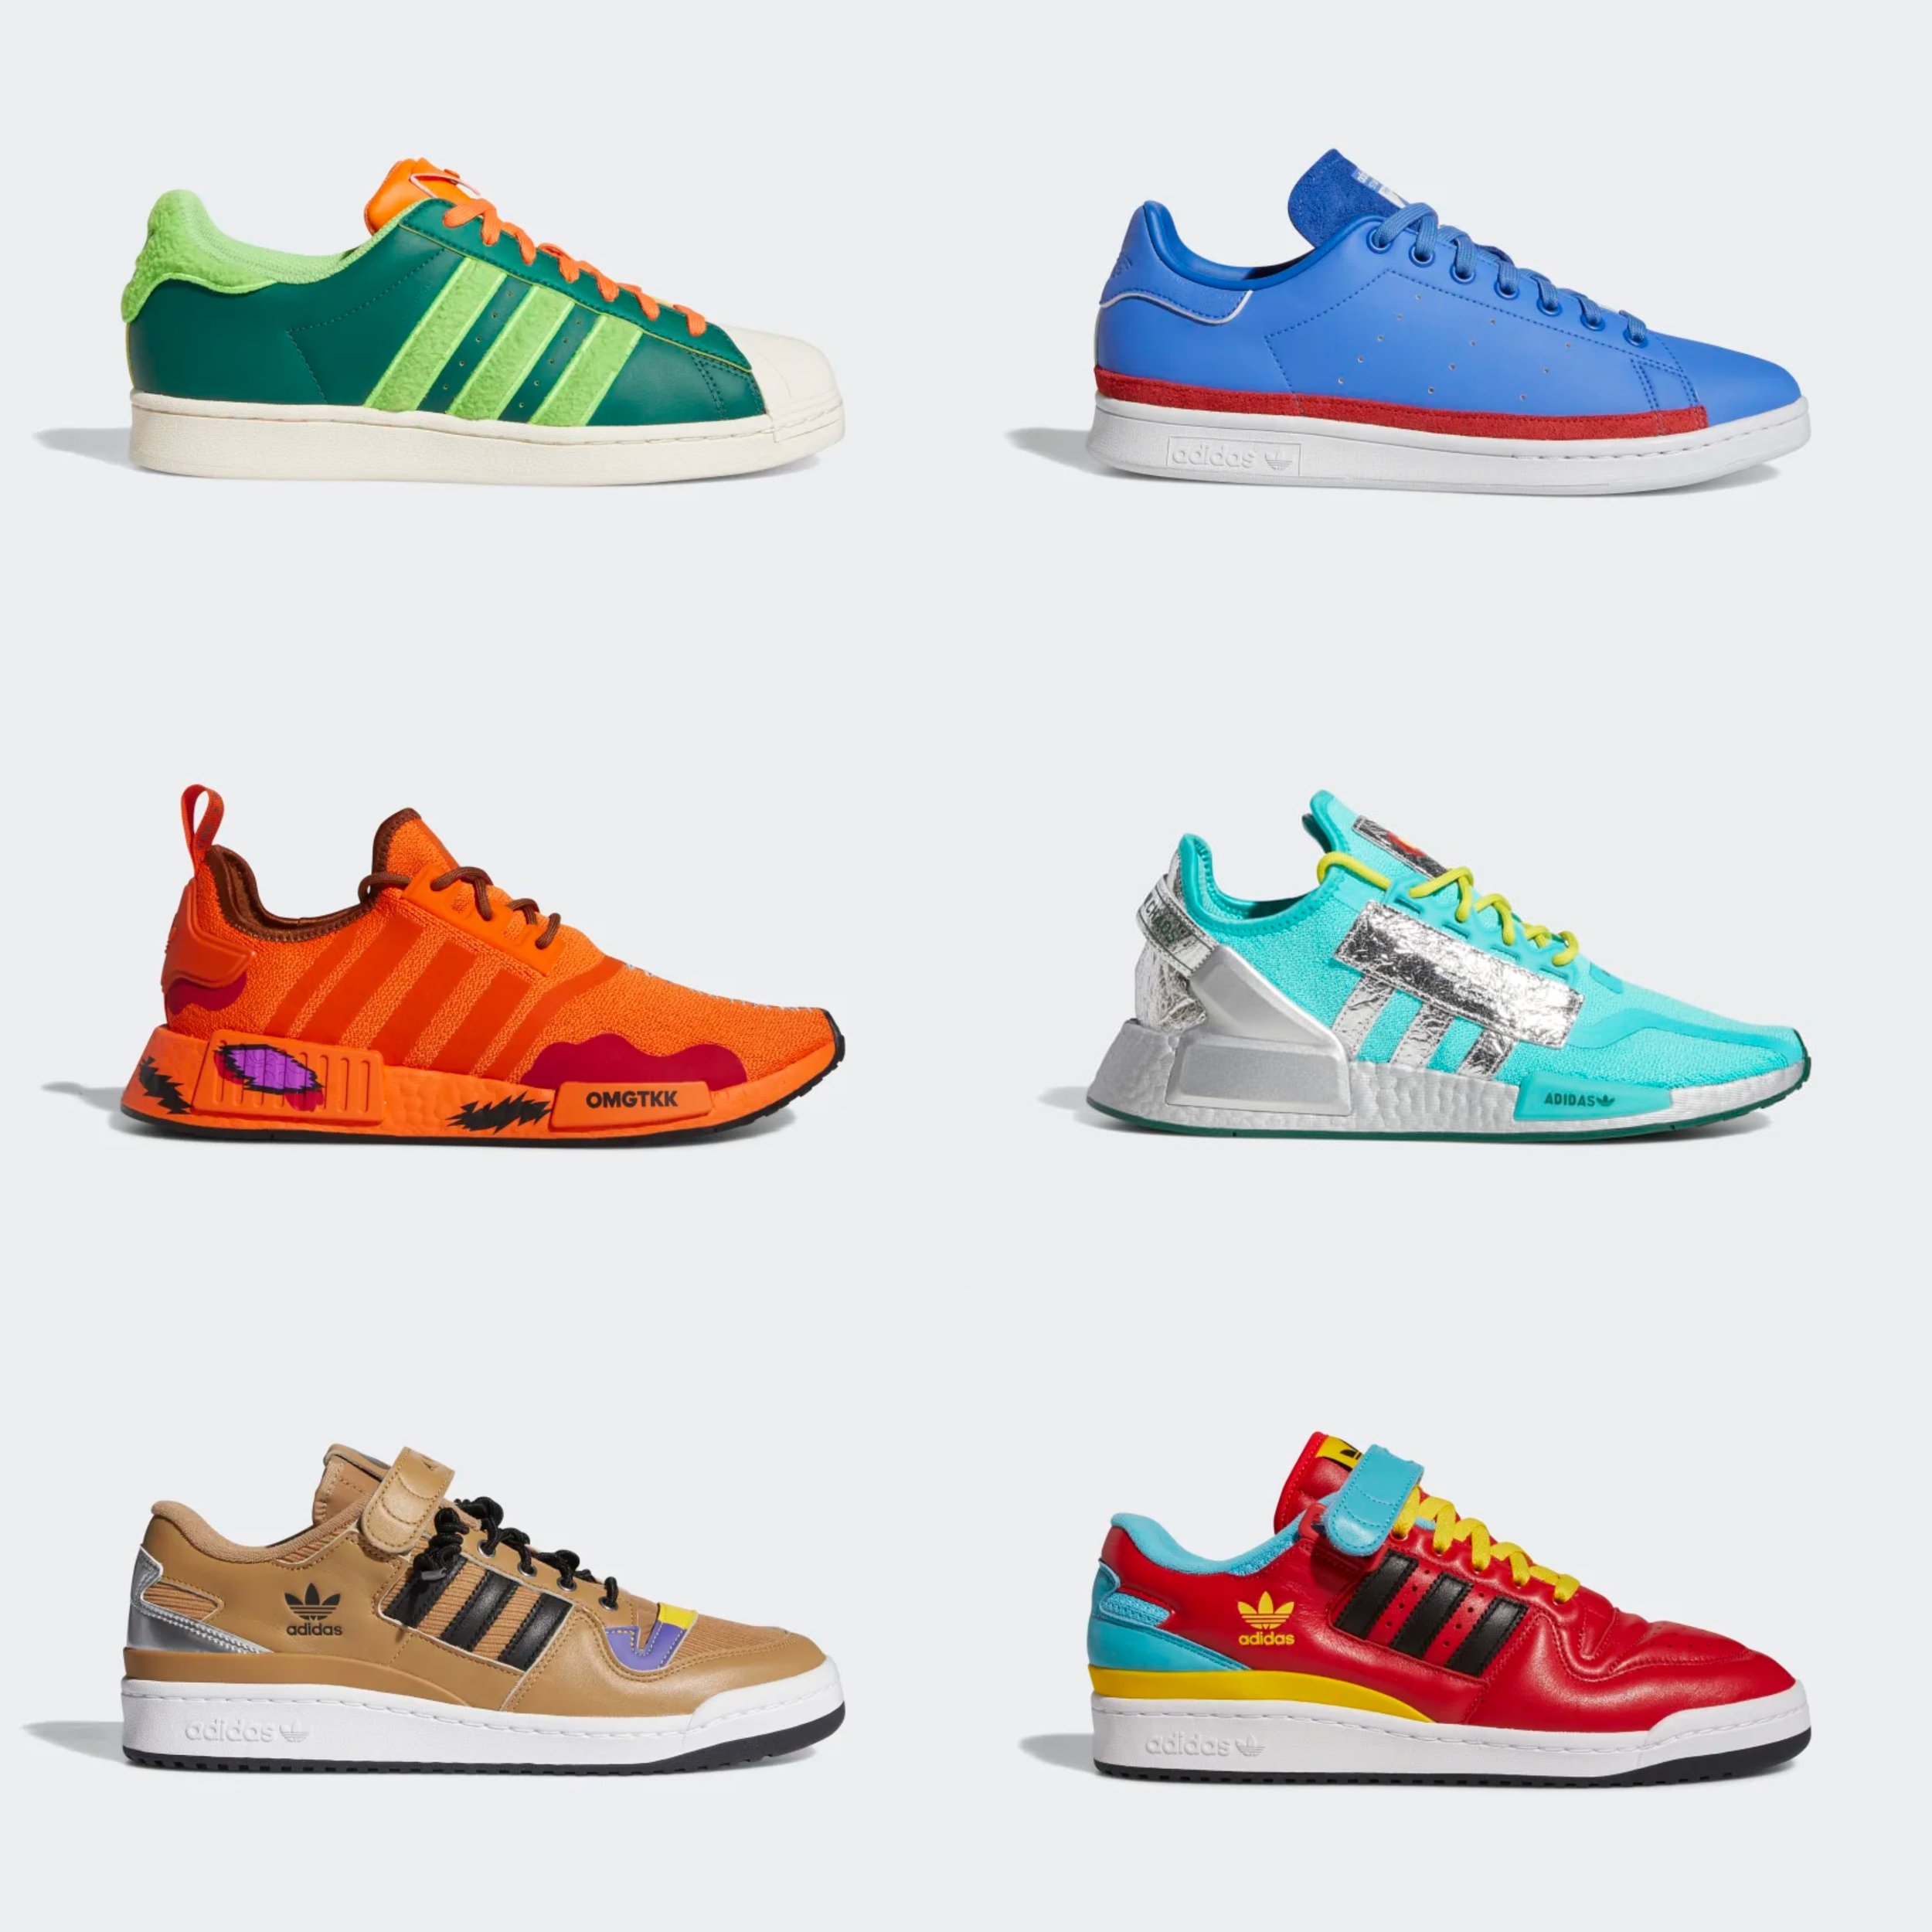 Now Available: South Park x adidas Originals Collection — Sneaker Shouts